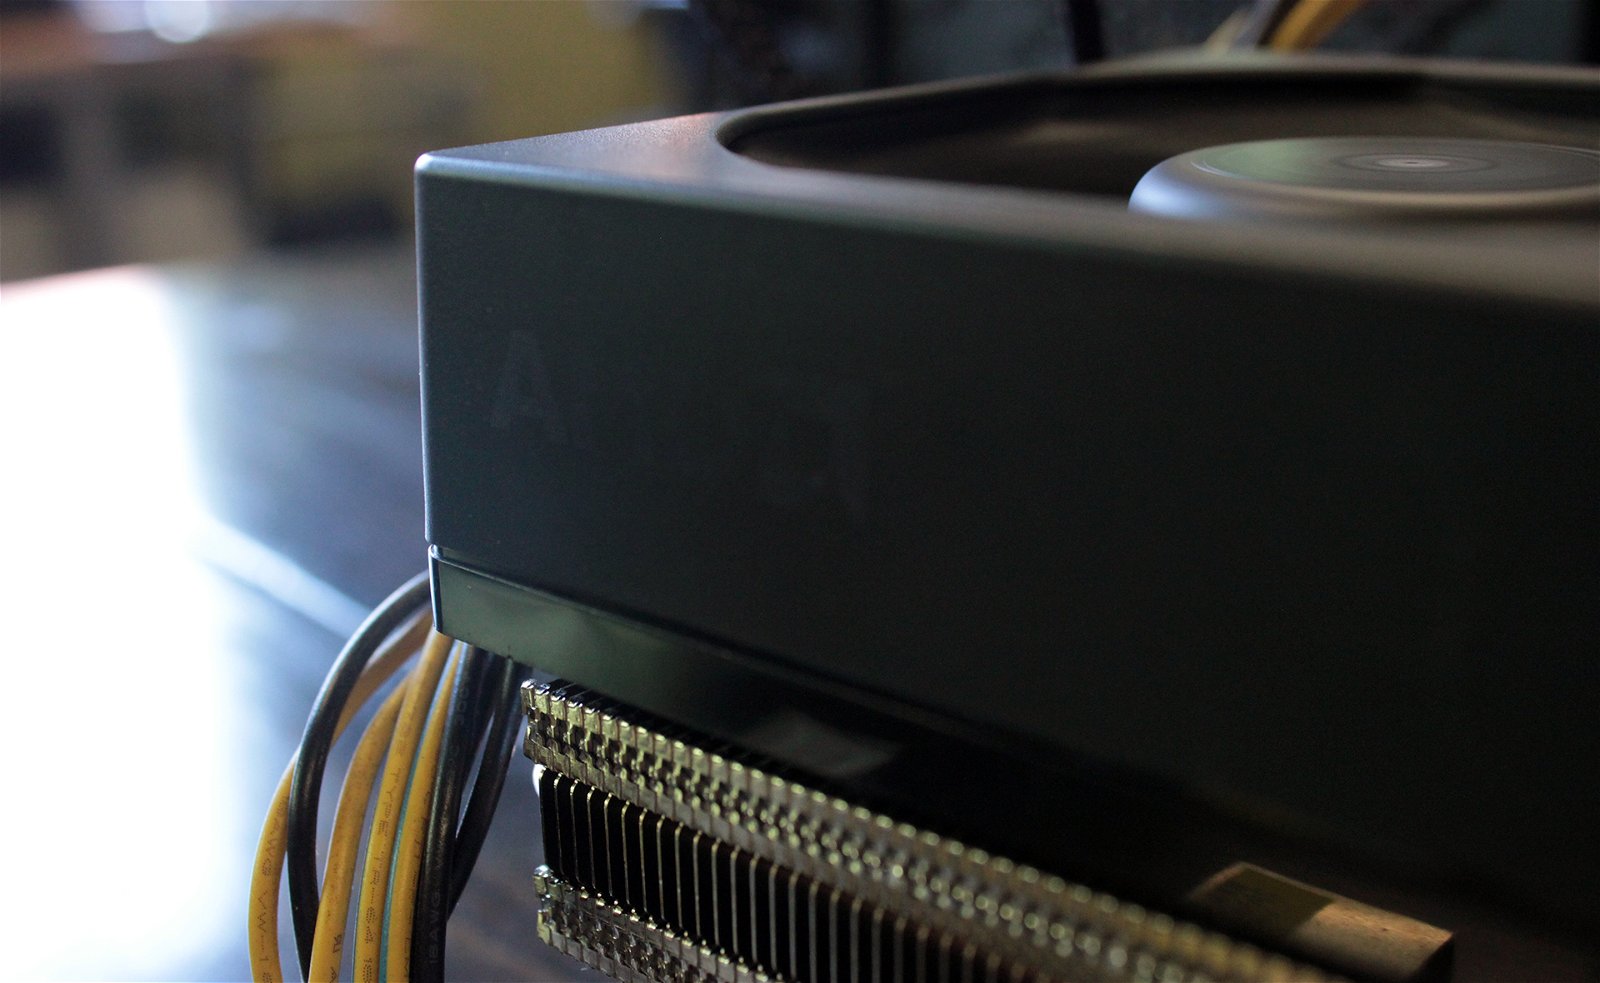 Amd Fx 8350 Wraith Cooler (Hardware) Review 2